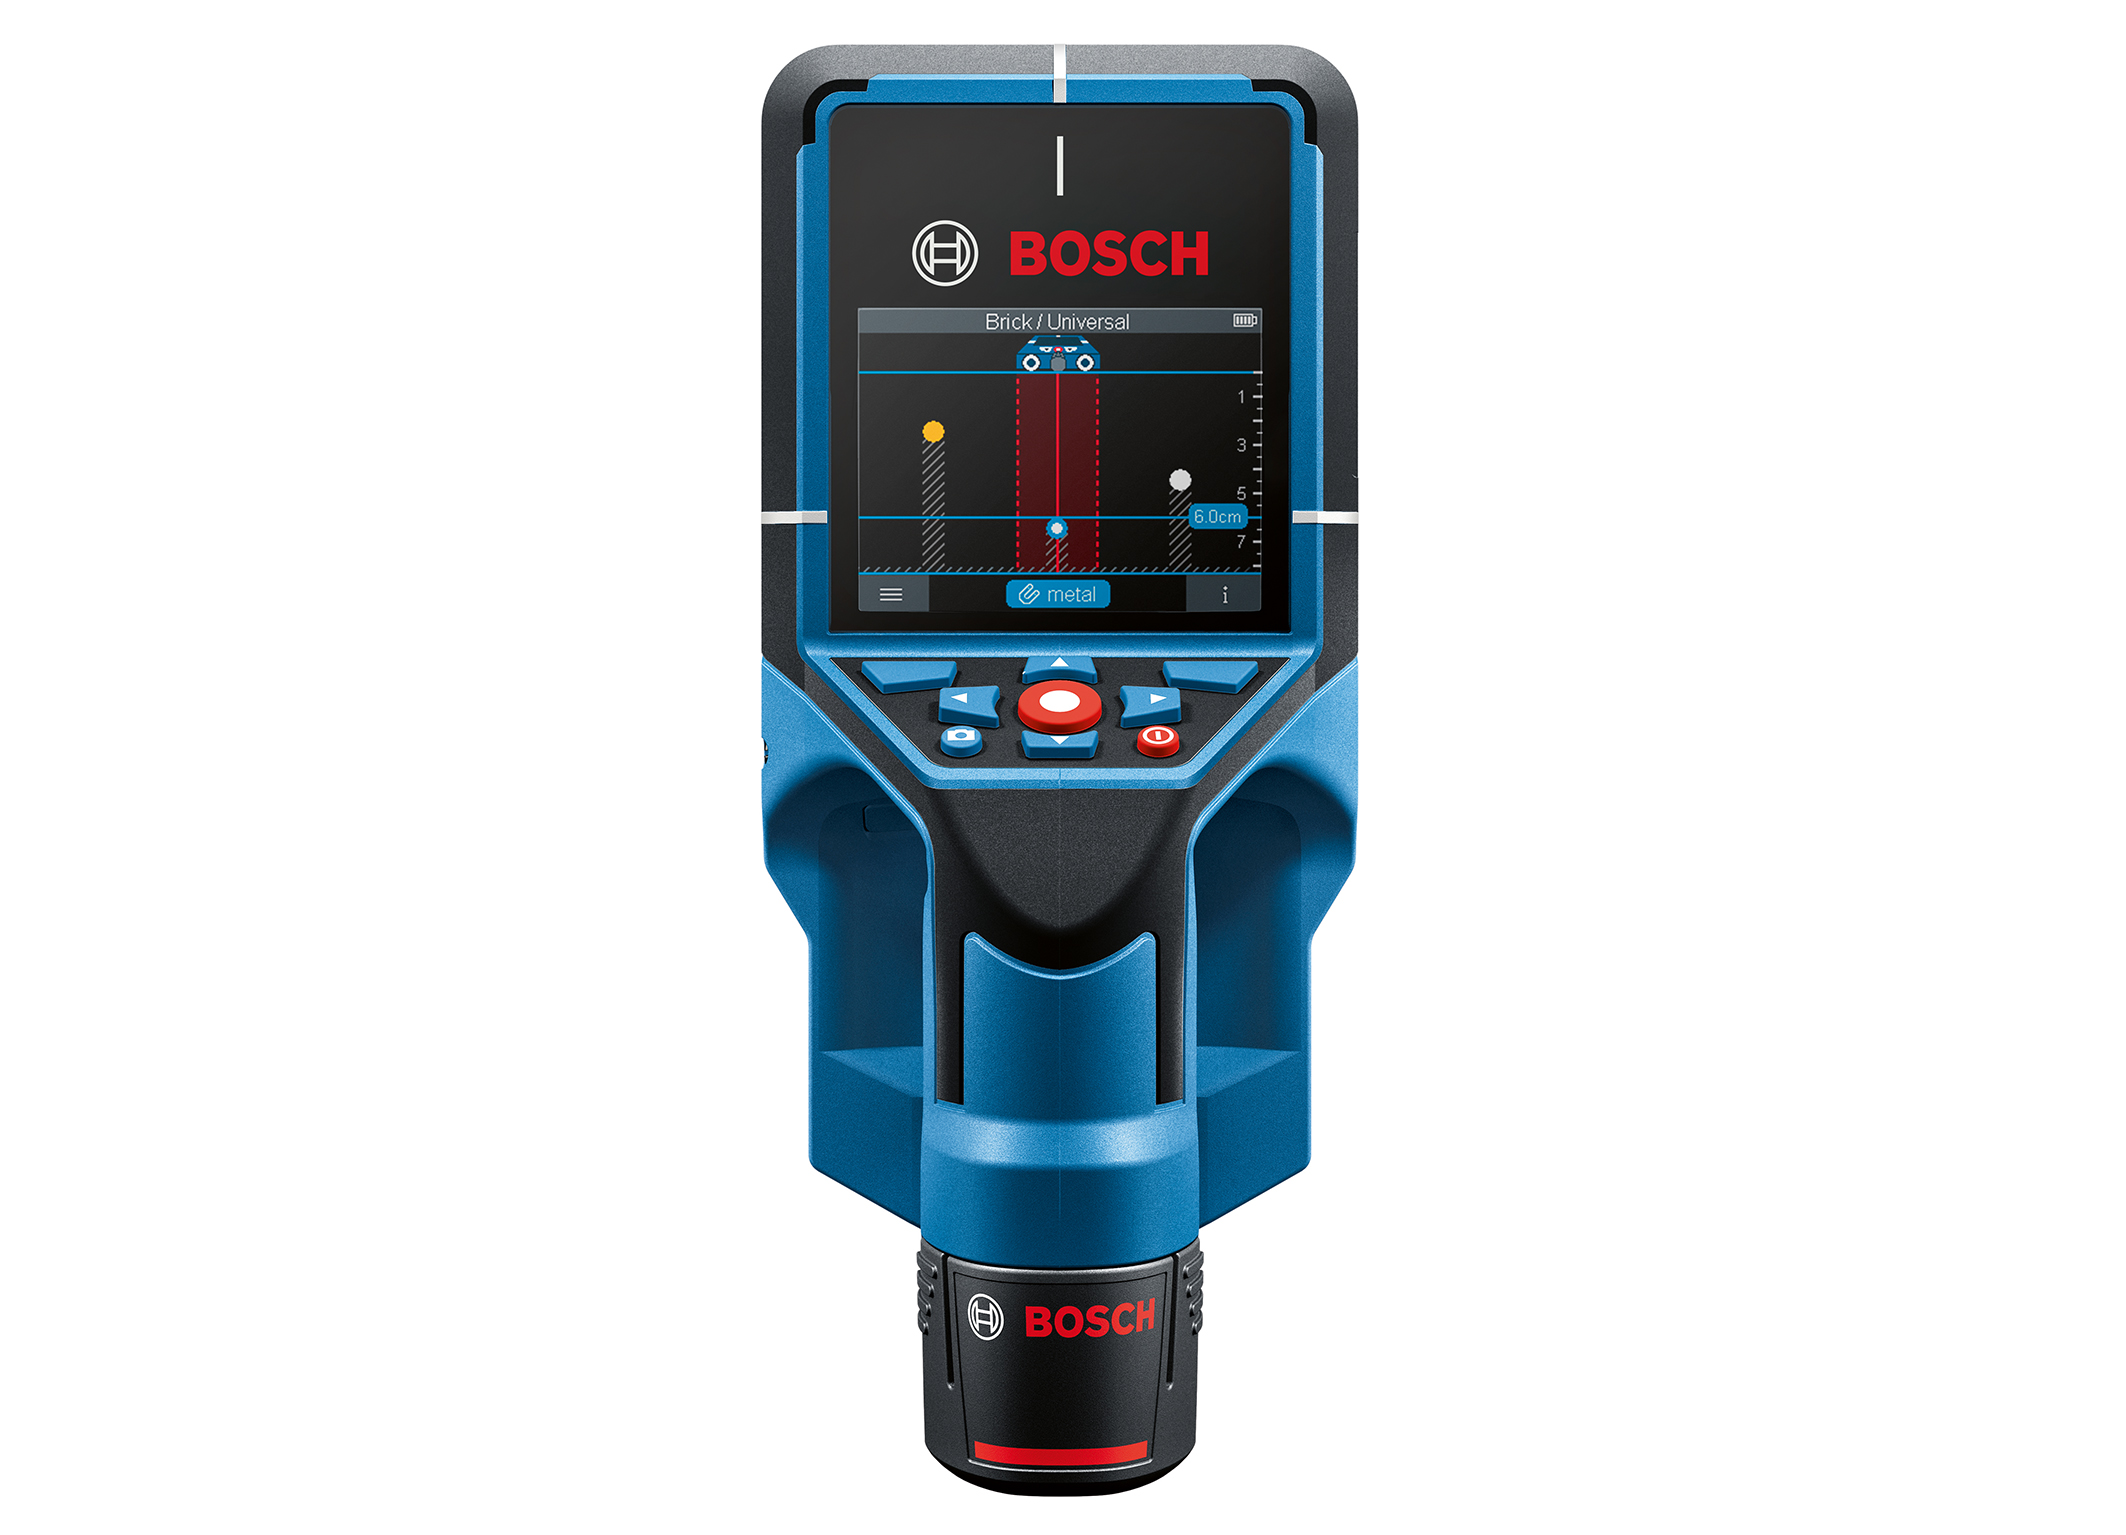 Easy detection and documentation: The Bosch D-tect 200 C Professional for pros